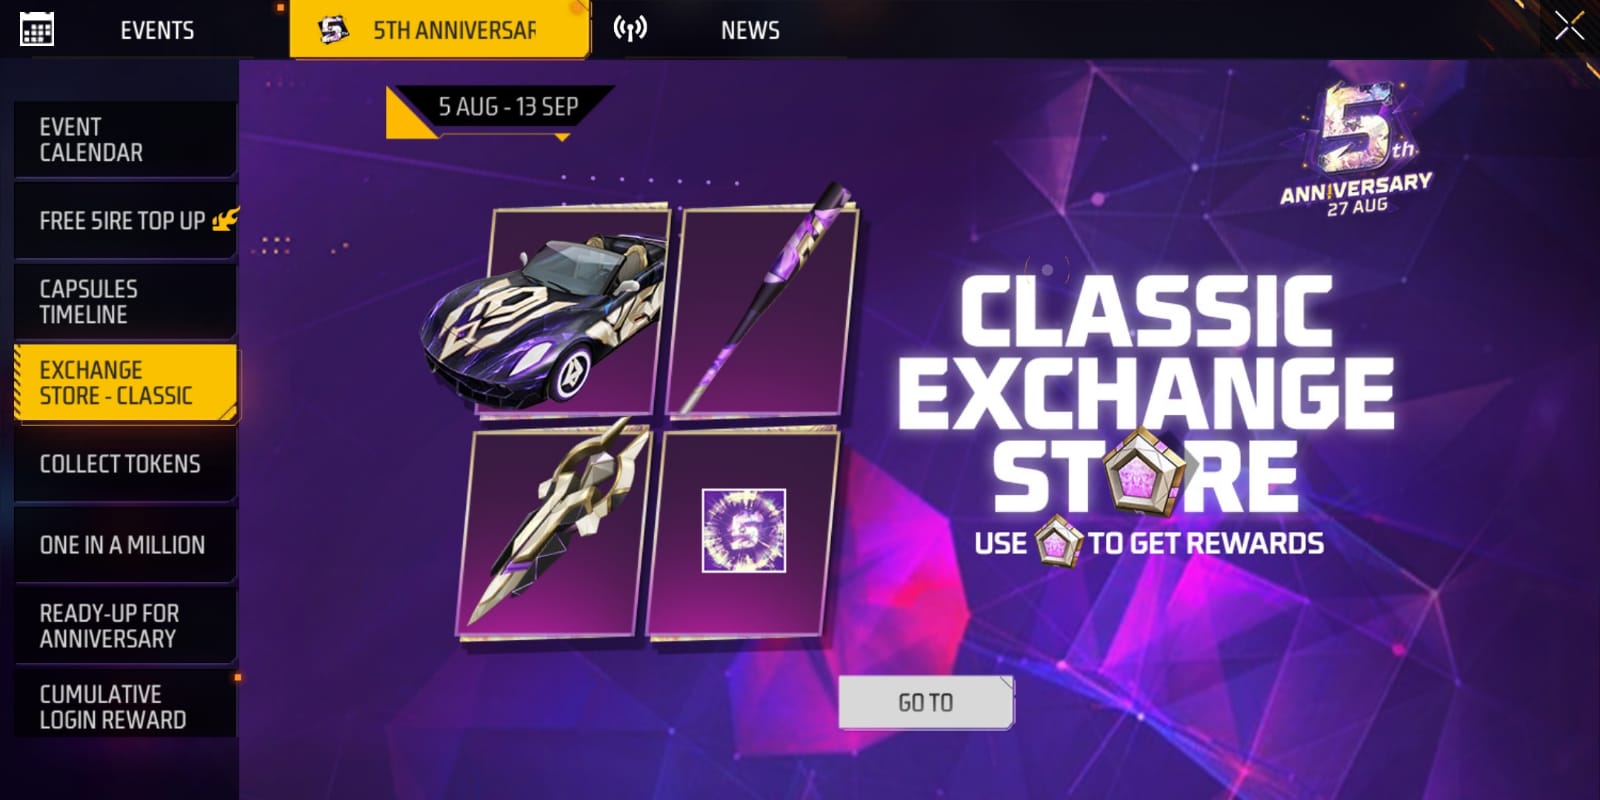 Free Fire MAX Fifth Anniversary: Mega celebrations start in-game with loads of rewards up for grabs, all you need to know about the event and its rewards.